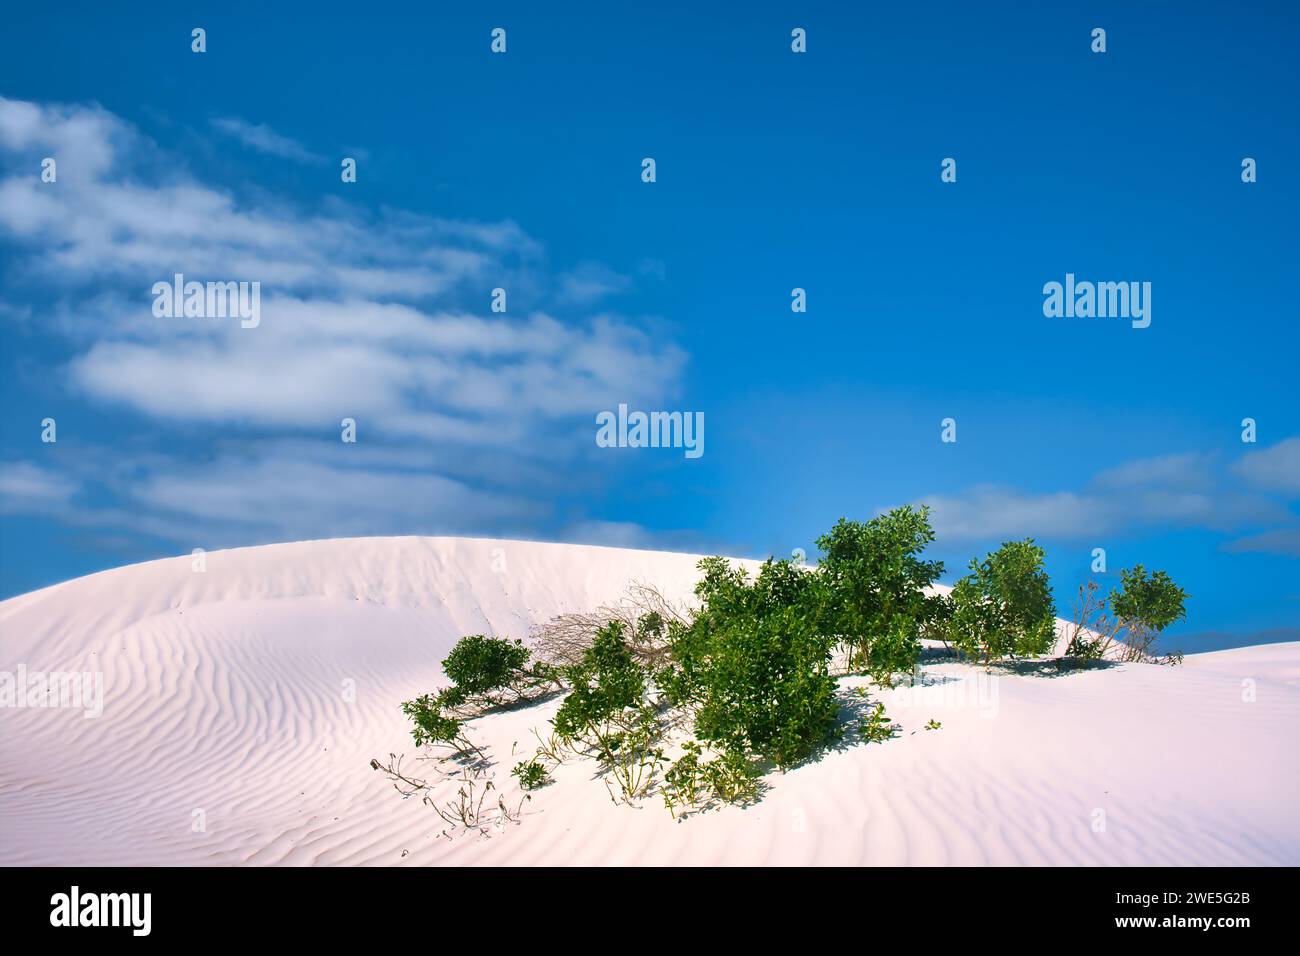 Rippled white sand dune with some bright green bushes under a blue sky. Green Head area, Coral Coast, Western Australia Stock Photo